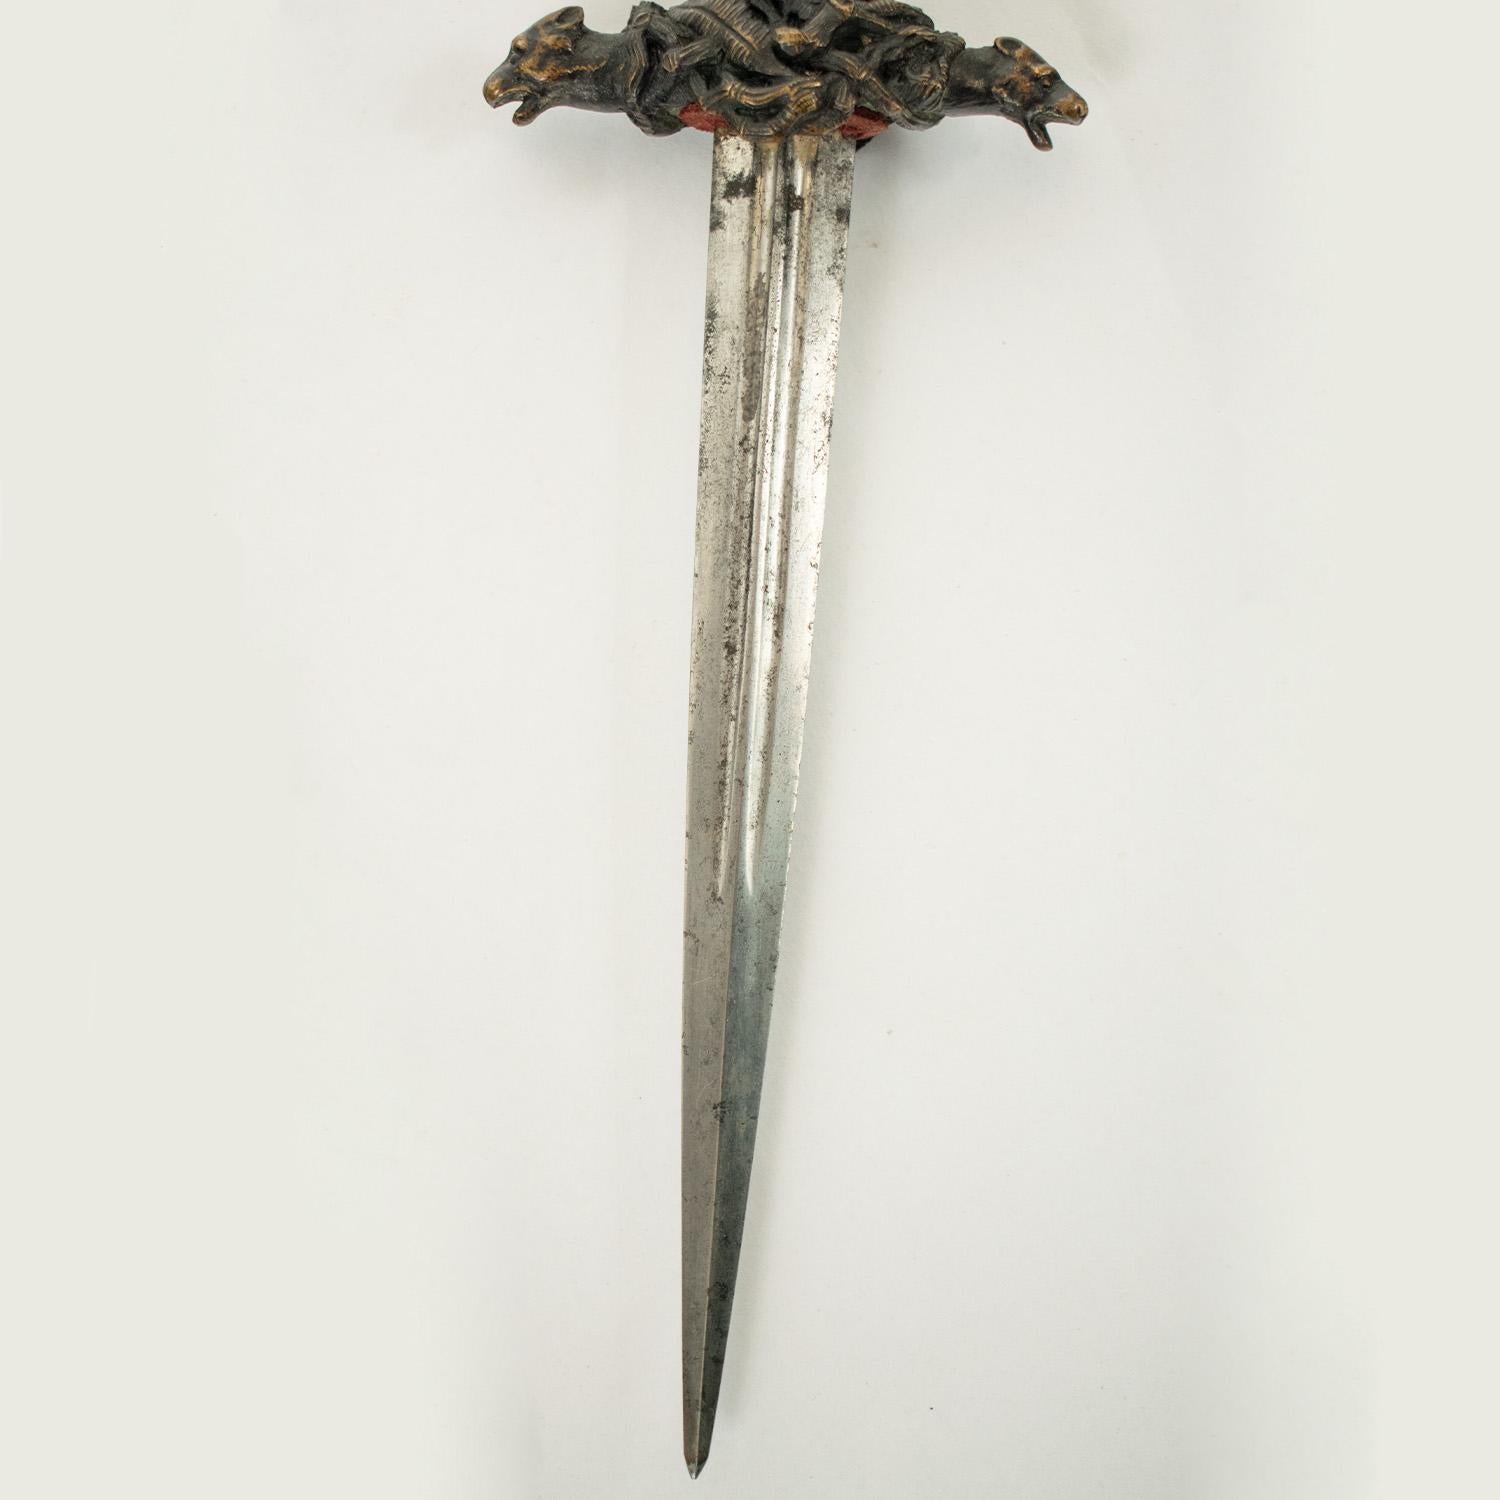 AMERICAN THEMED Romantic Dagger - early to mid 19th century - Spanish For Sale 2